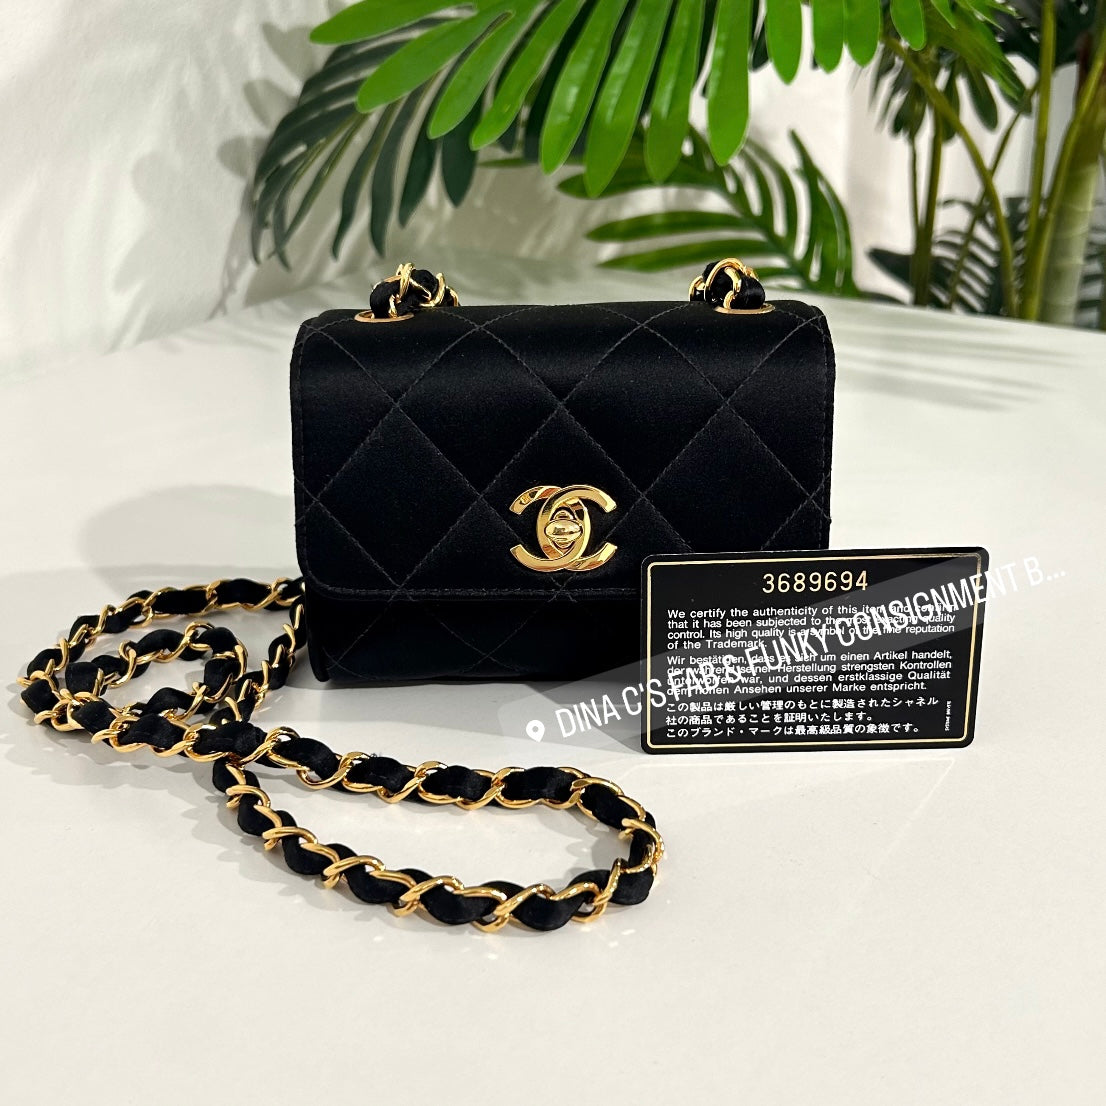 Chanel Handbags Shop, Authentic Preowned Chanel Bags